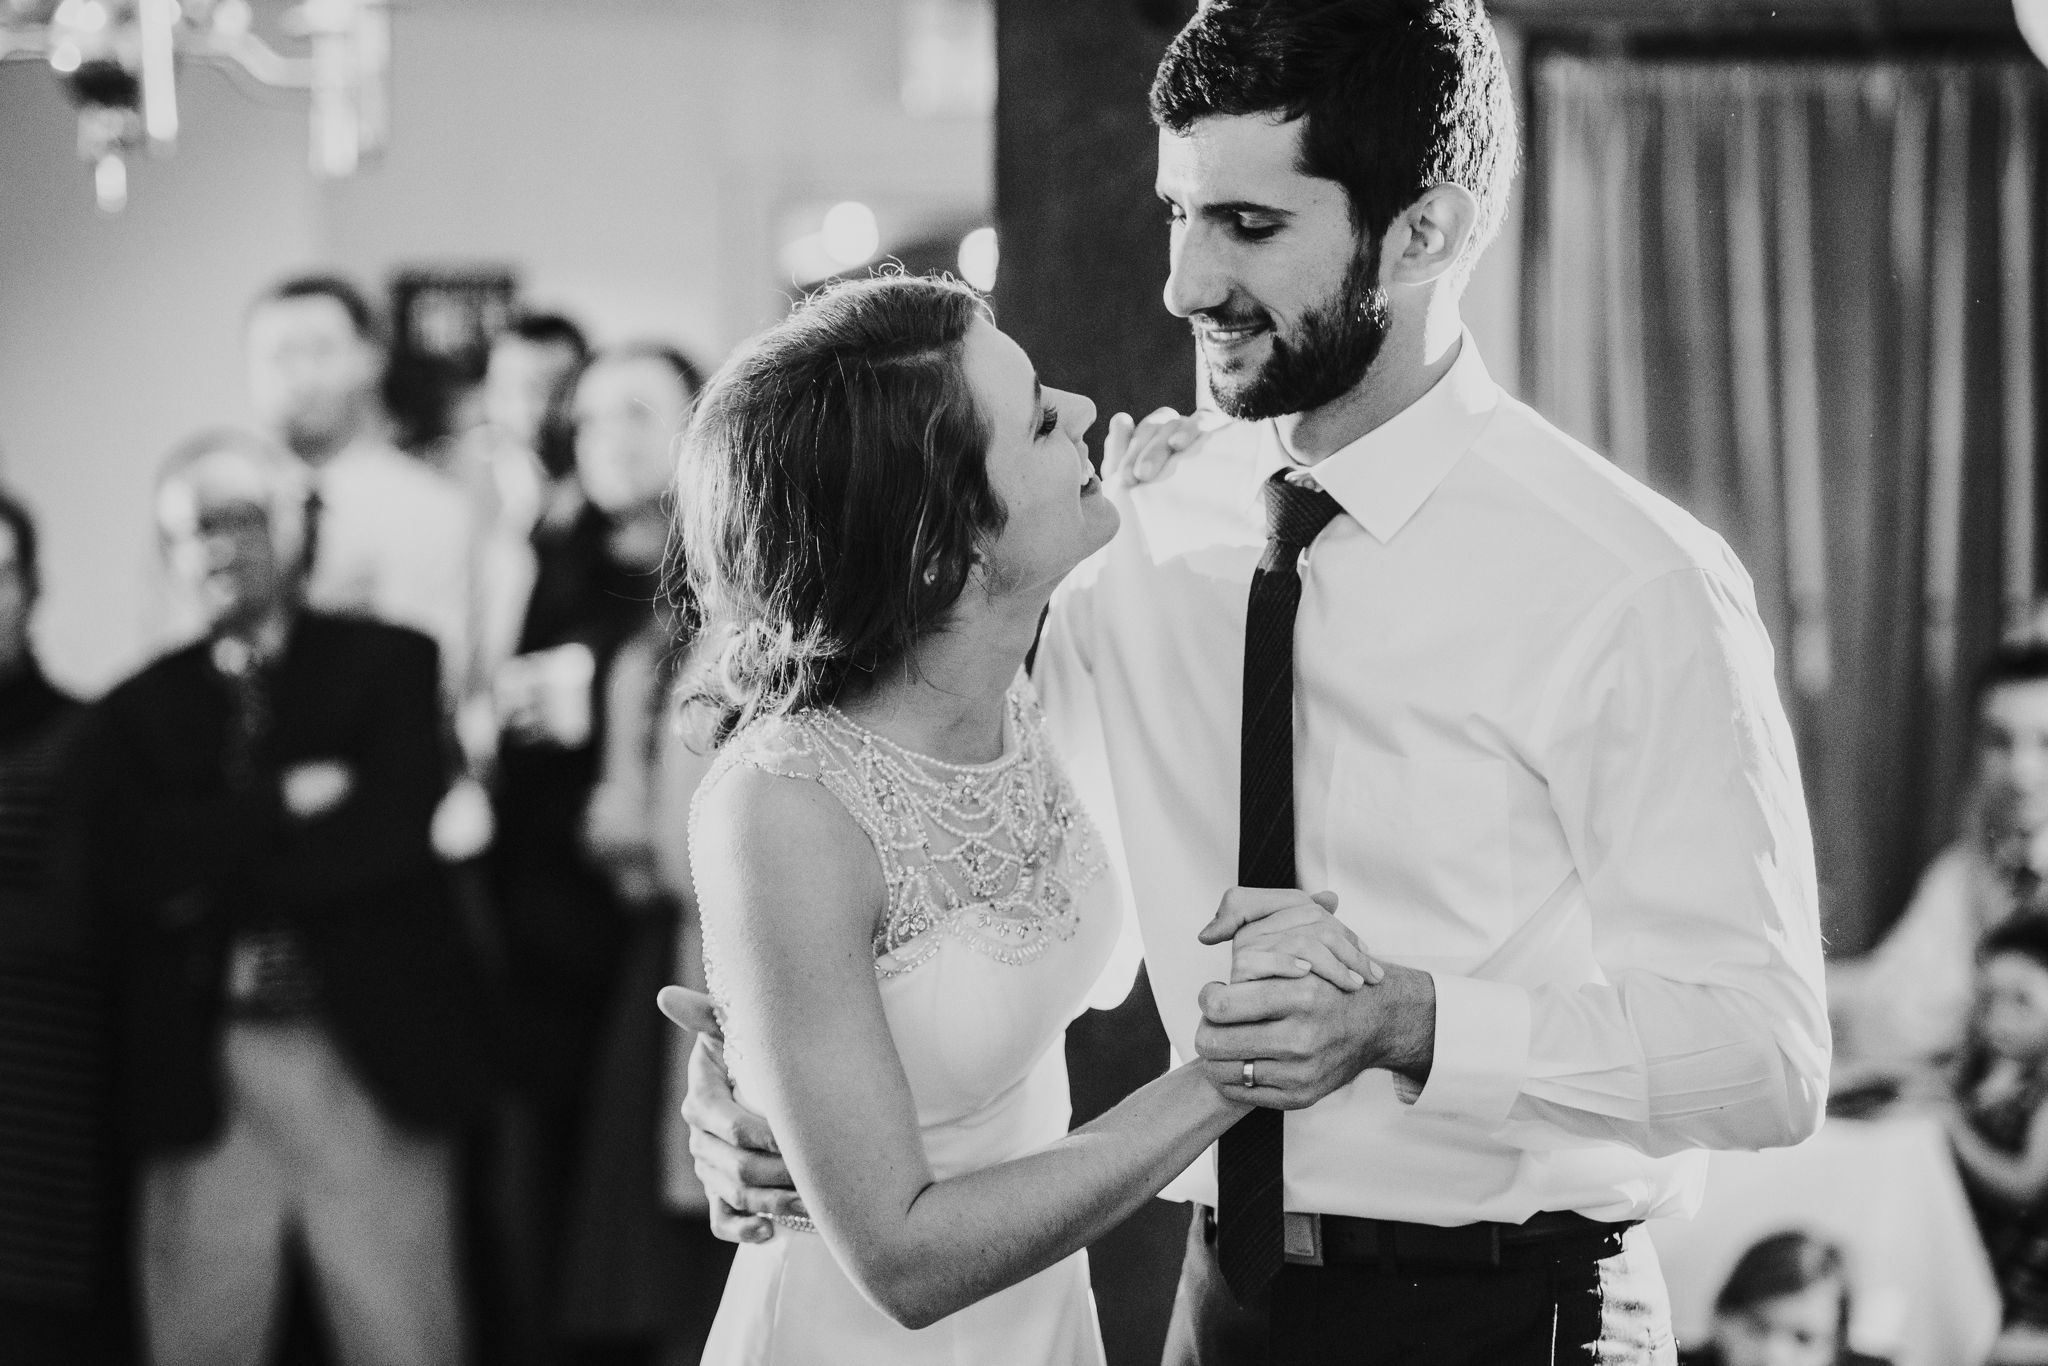 The bride and groom's first dance at their reception in the Barn at The Larimore House